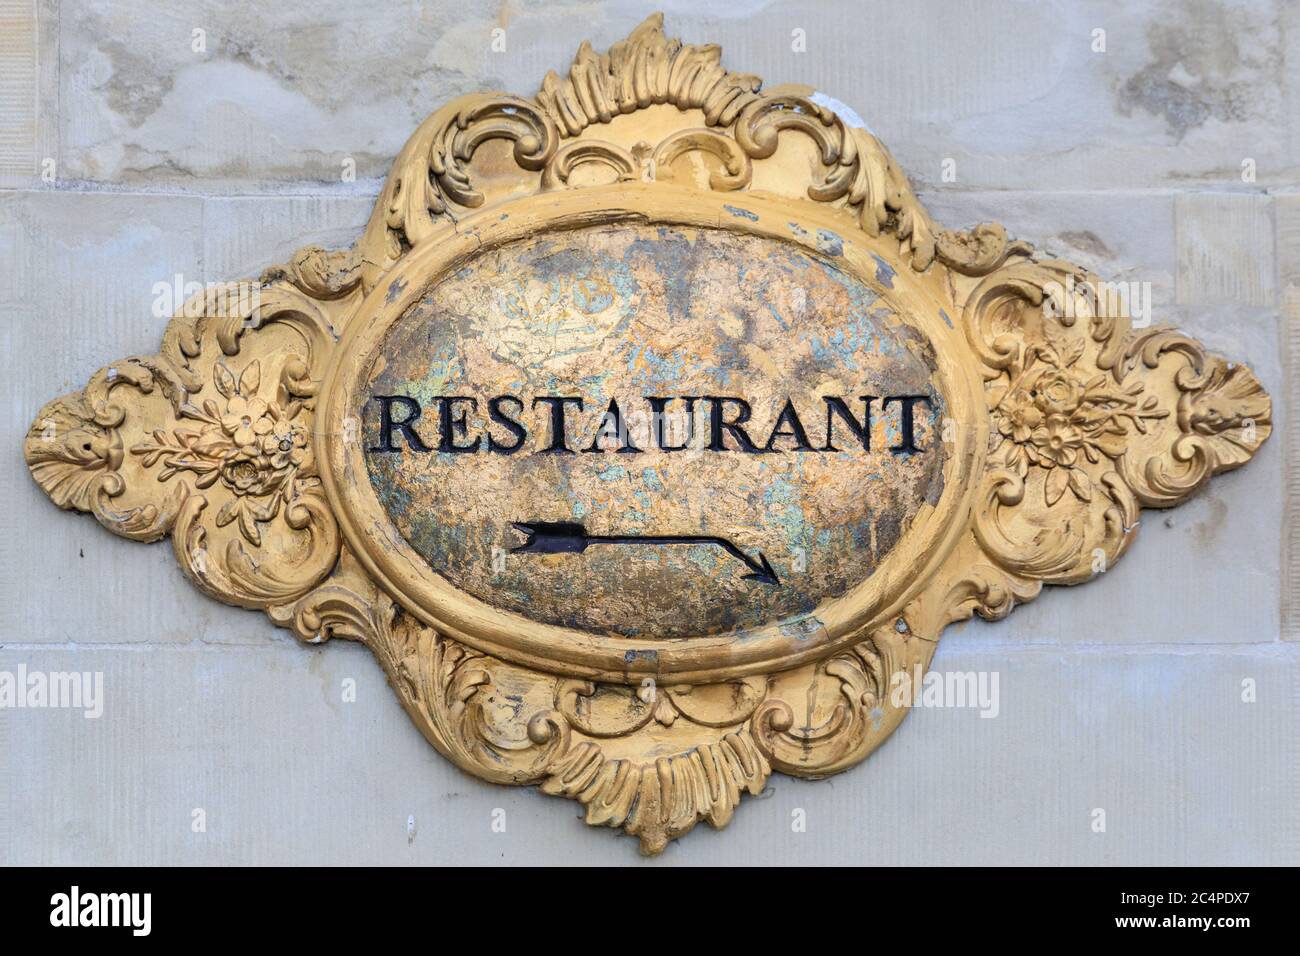 Elaborate gilded restaurant hospitality sign in baroque style on exterior stone wall Stock Photo